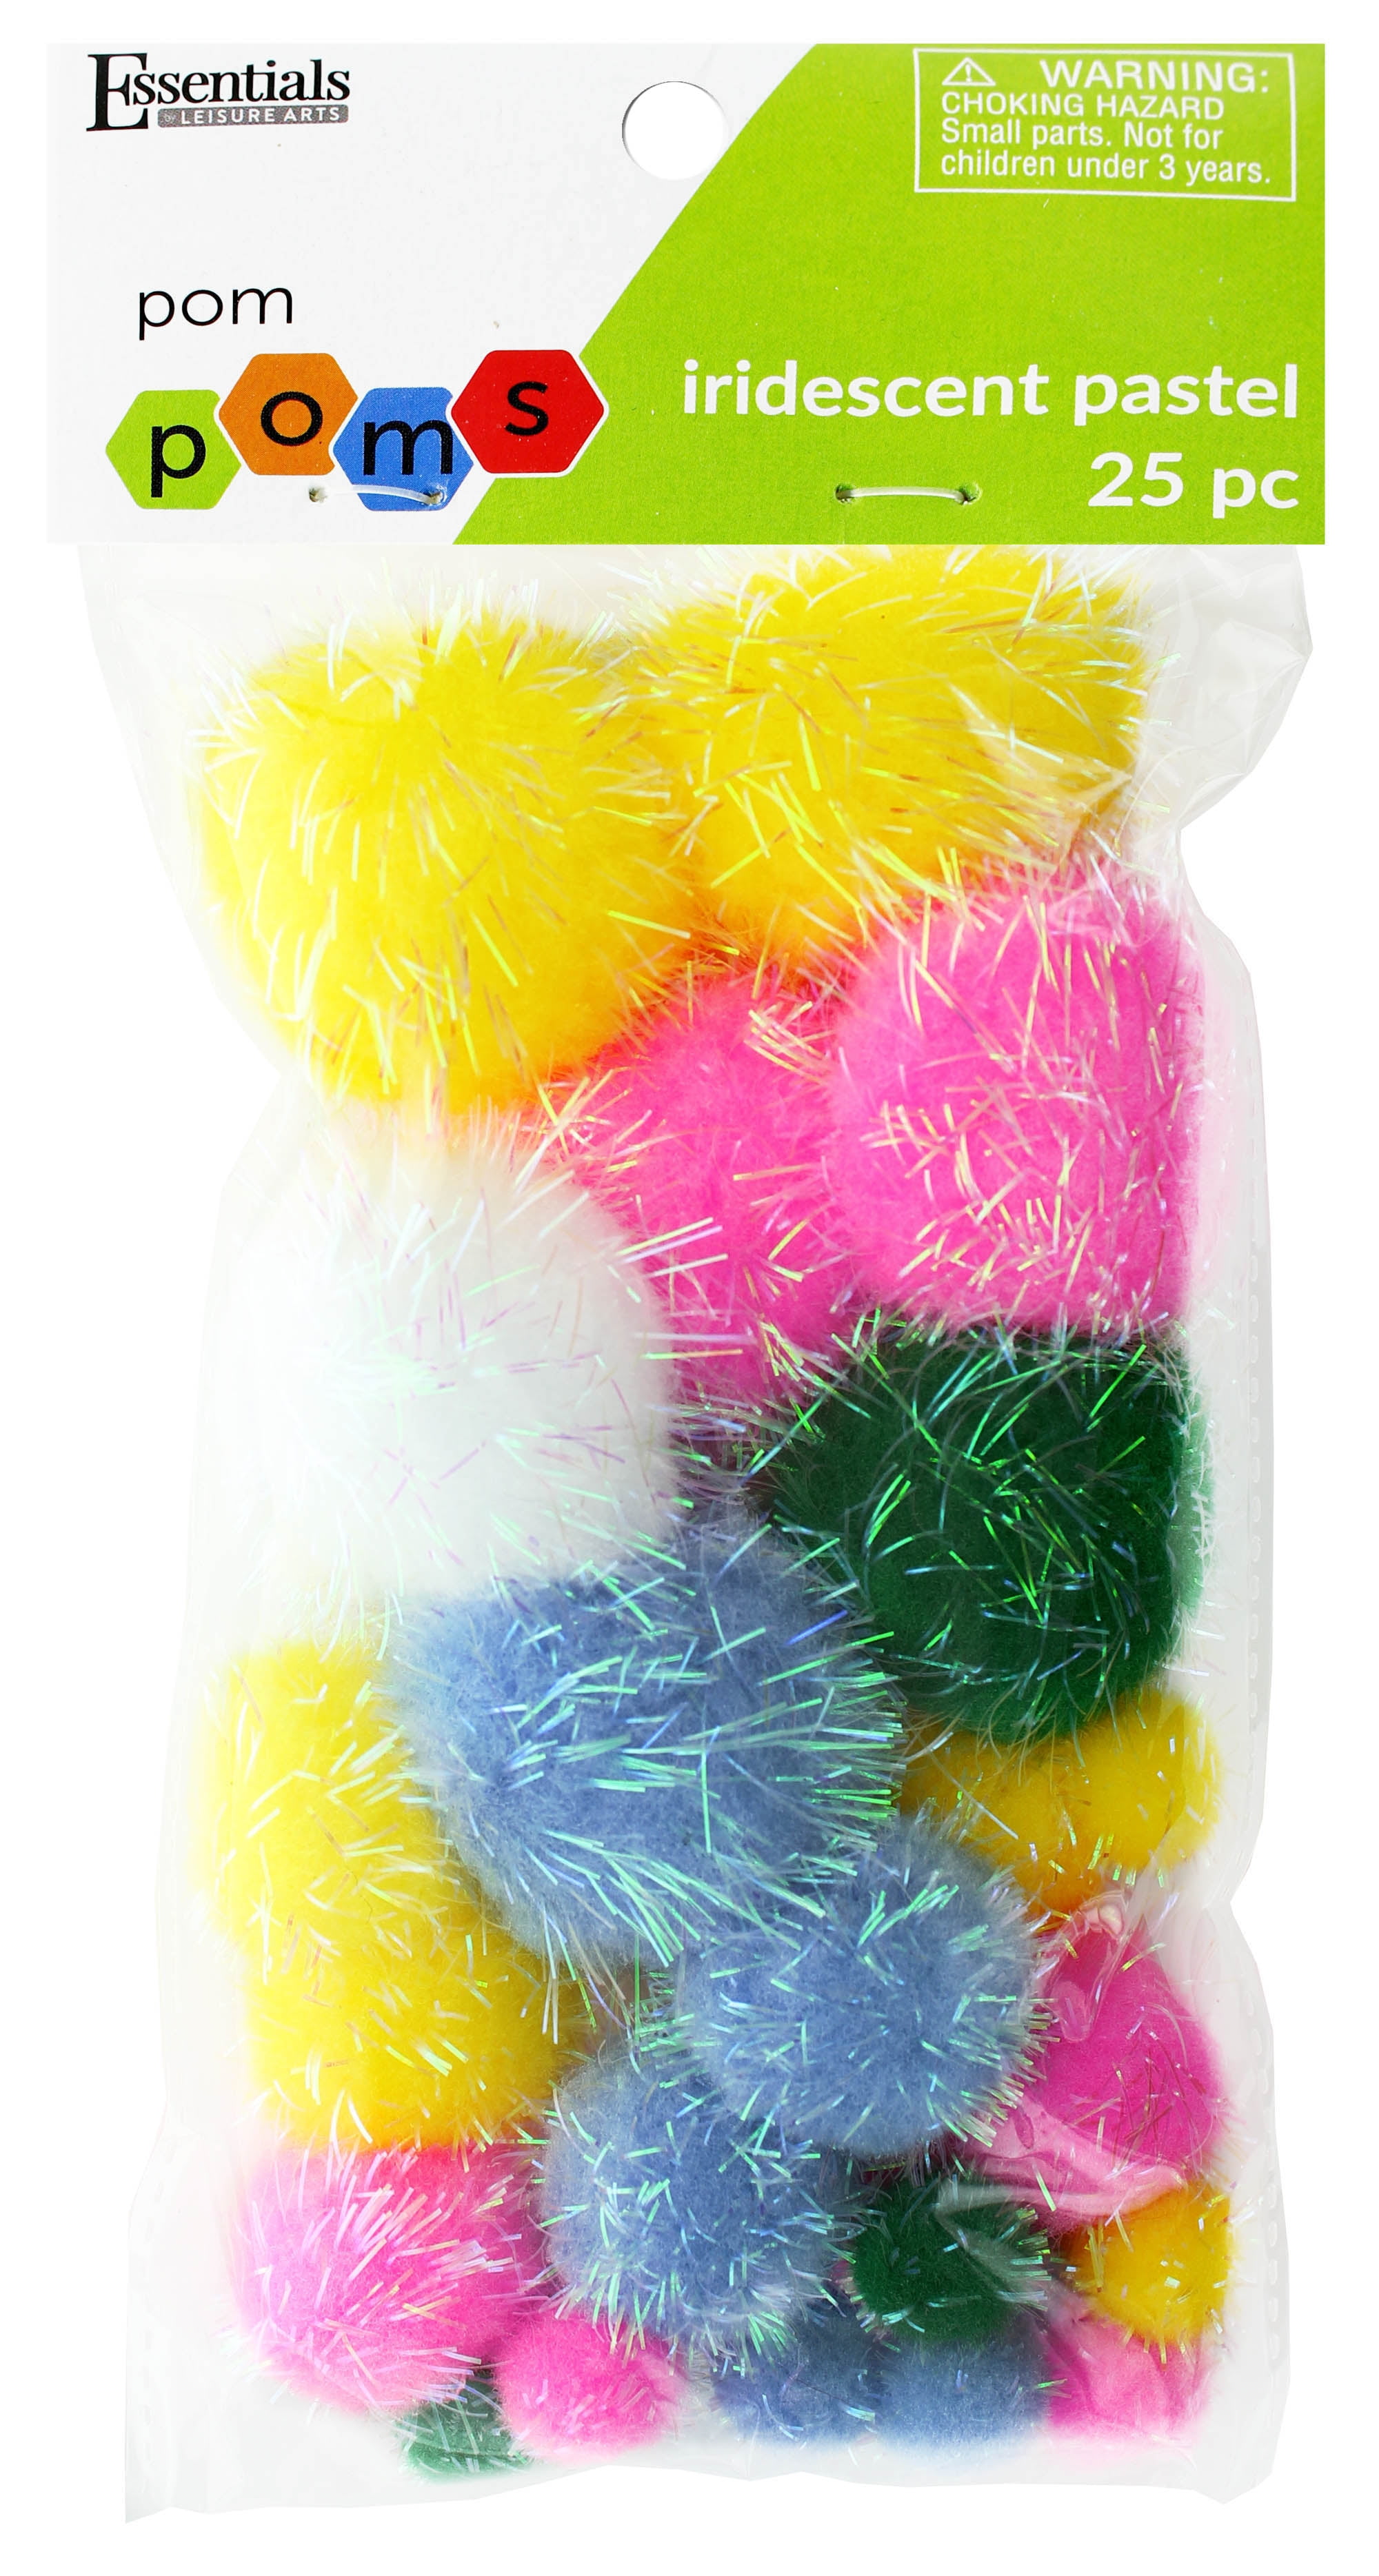 Baker Ross AT762 Rainbow Colors Woolly Pom Poms - Pack of 80, Craft Embellishments, Ideal for Winter Arts and Crafts Projects for Kids